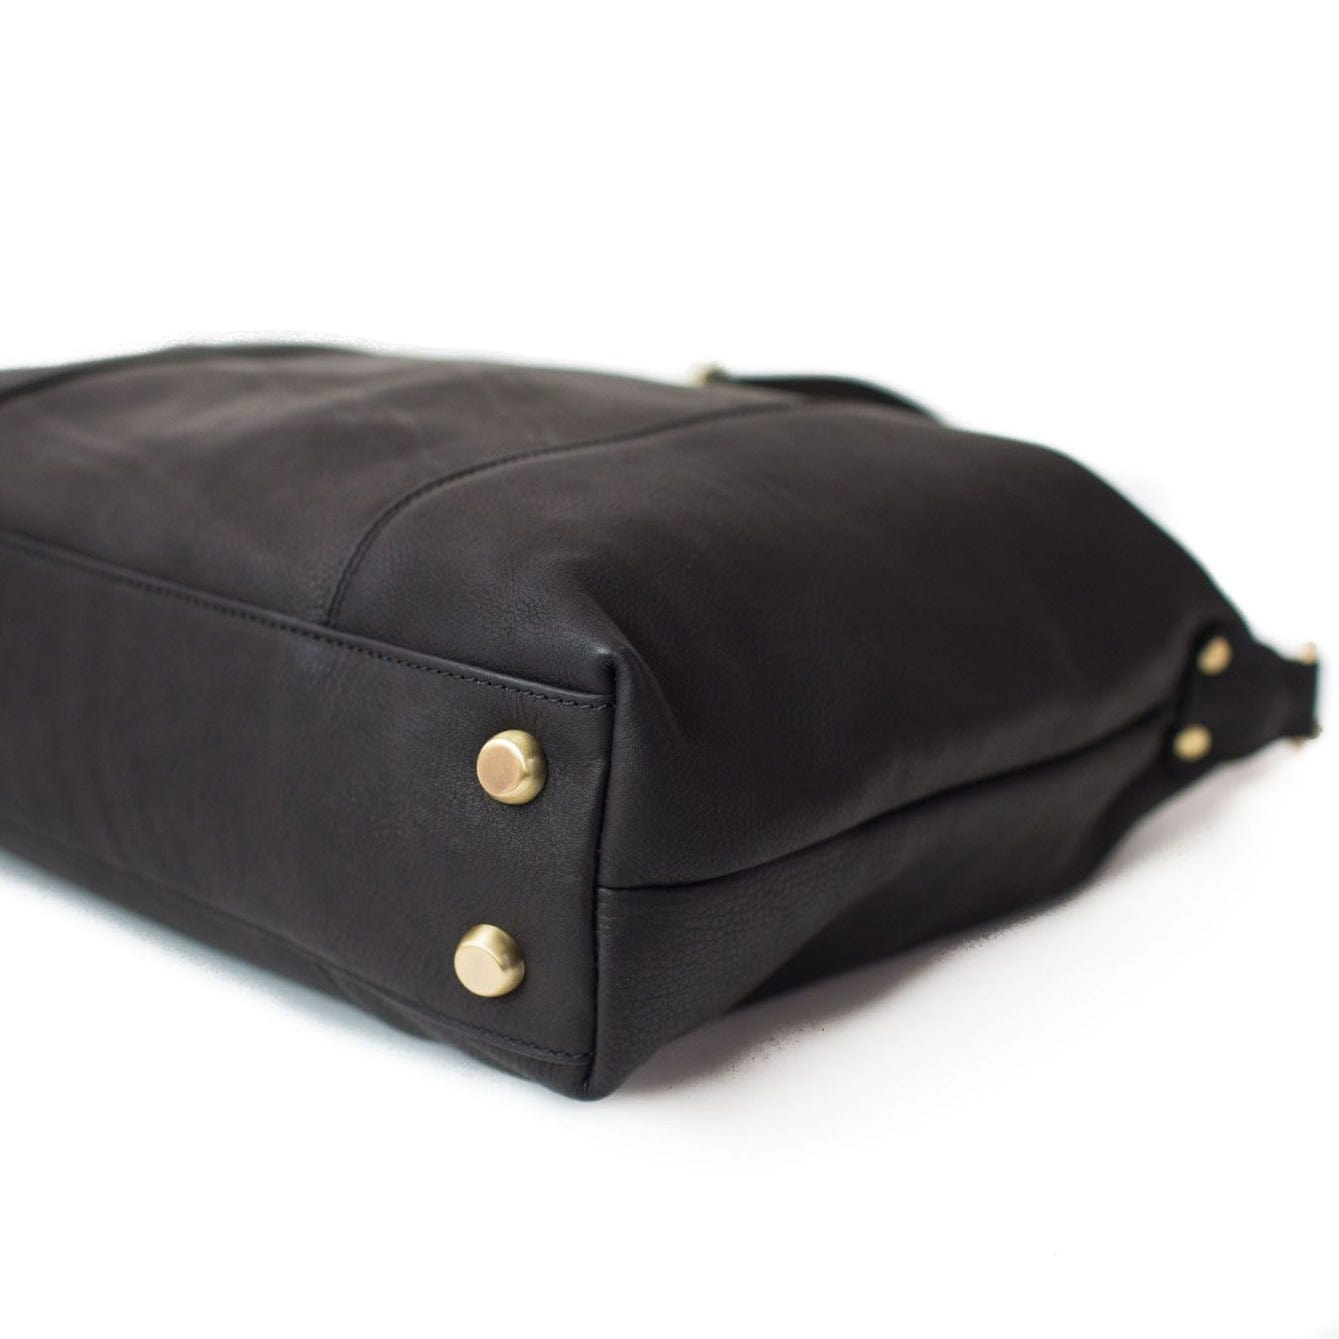 Linda Jean handbag in black raw leather has metal feet on the bottom to keep your bag protected.